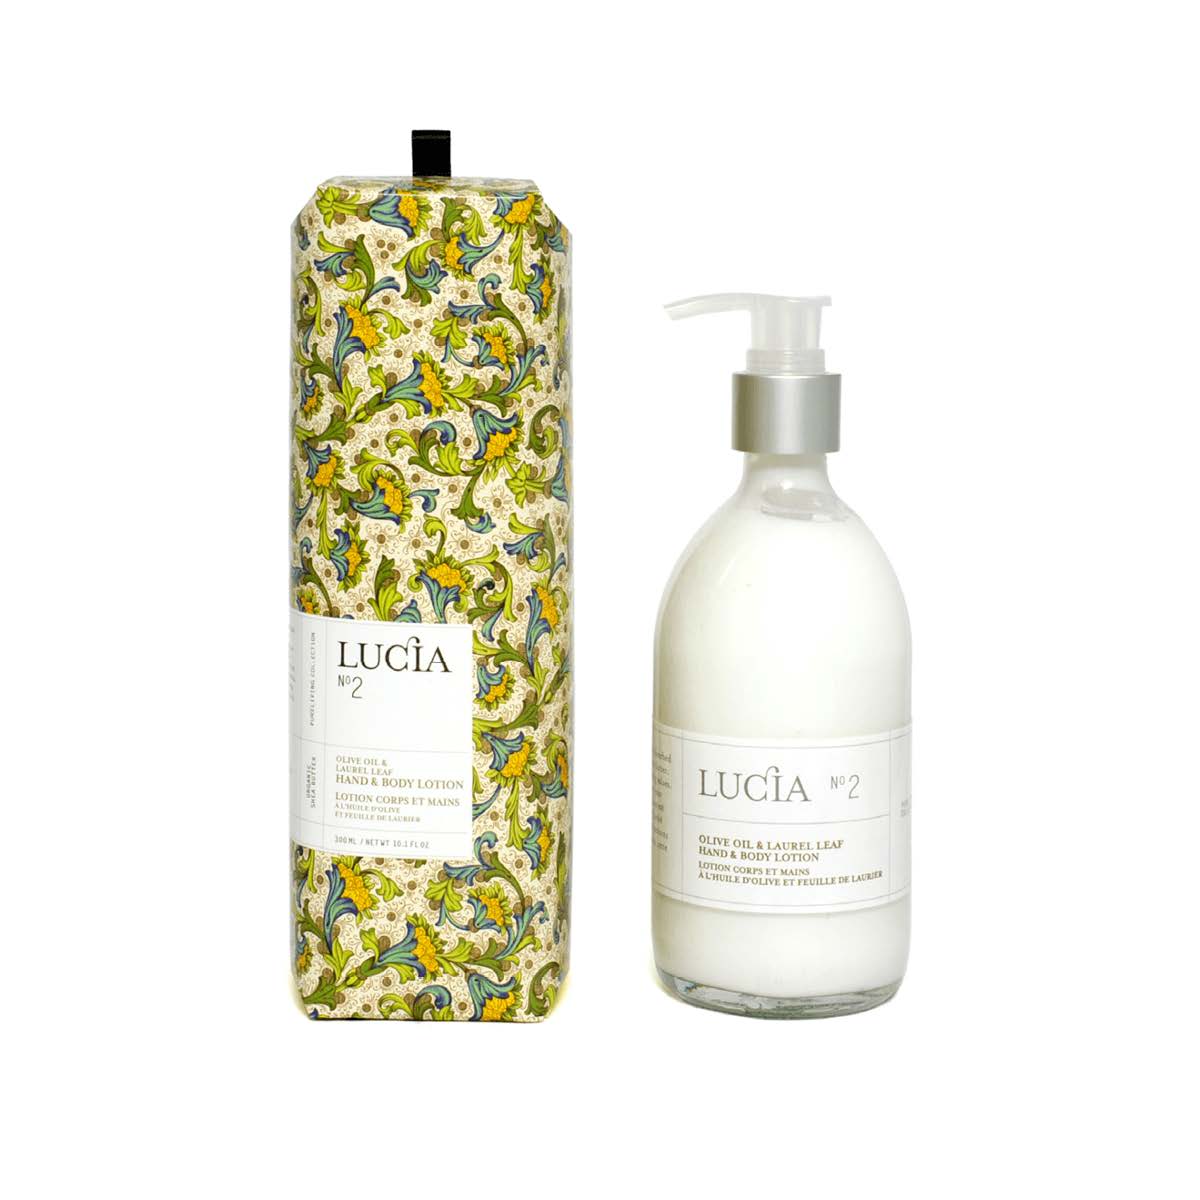 Lucia Lotion Hand and Body No. 2 Olive Oil and Laurel Leaf